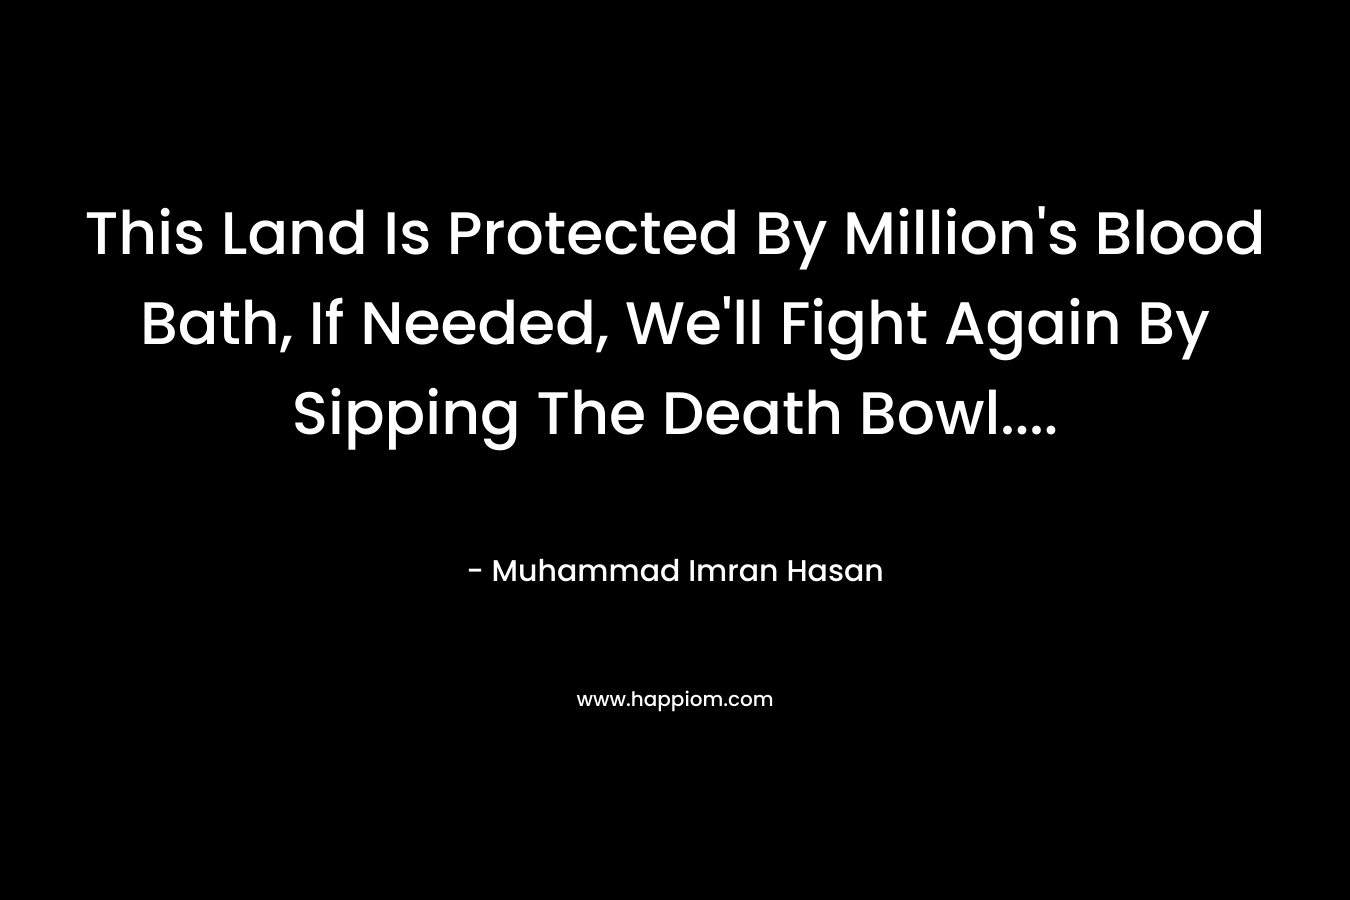 This Land Is Protected By Million's Blood Bath, If Needed, We'll Fight Again By Sipping The Death Bowl....